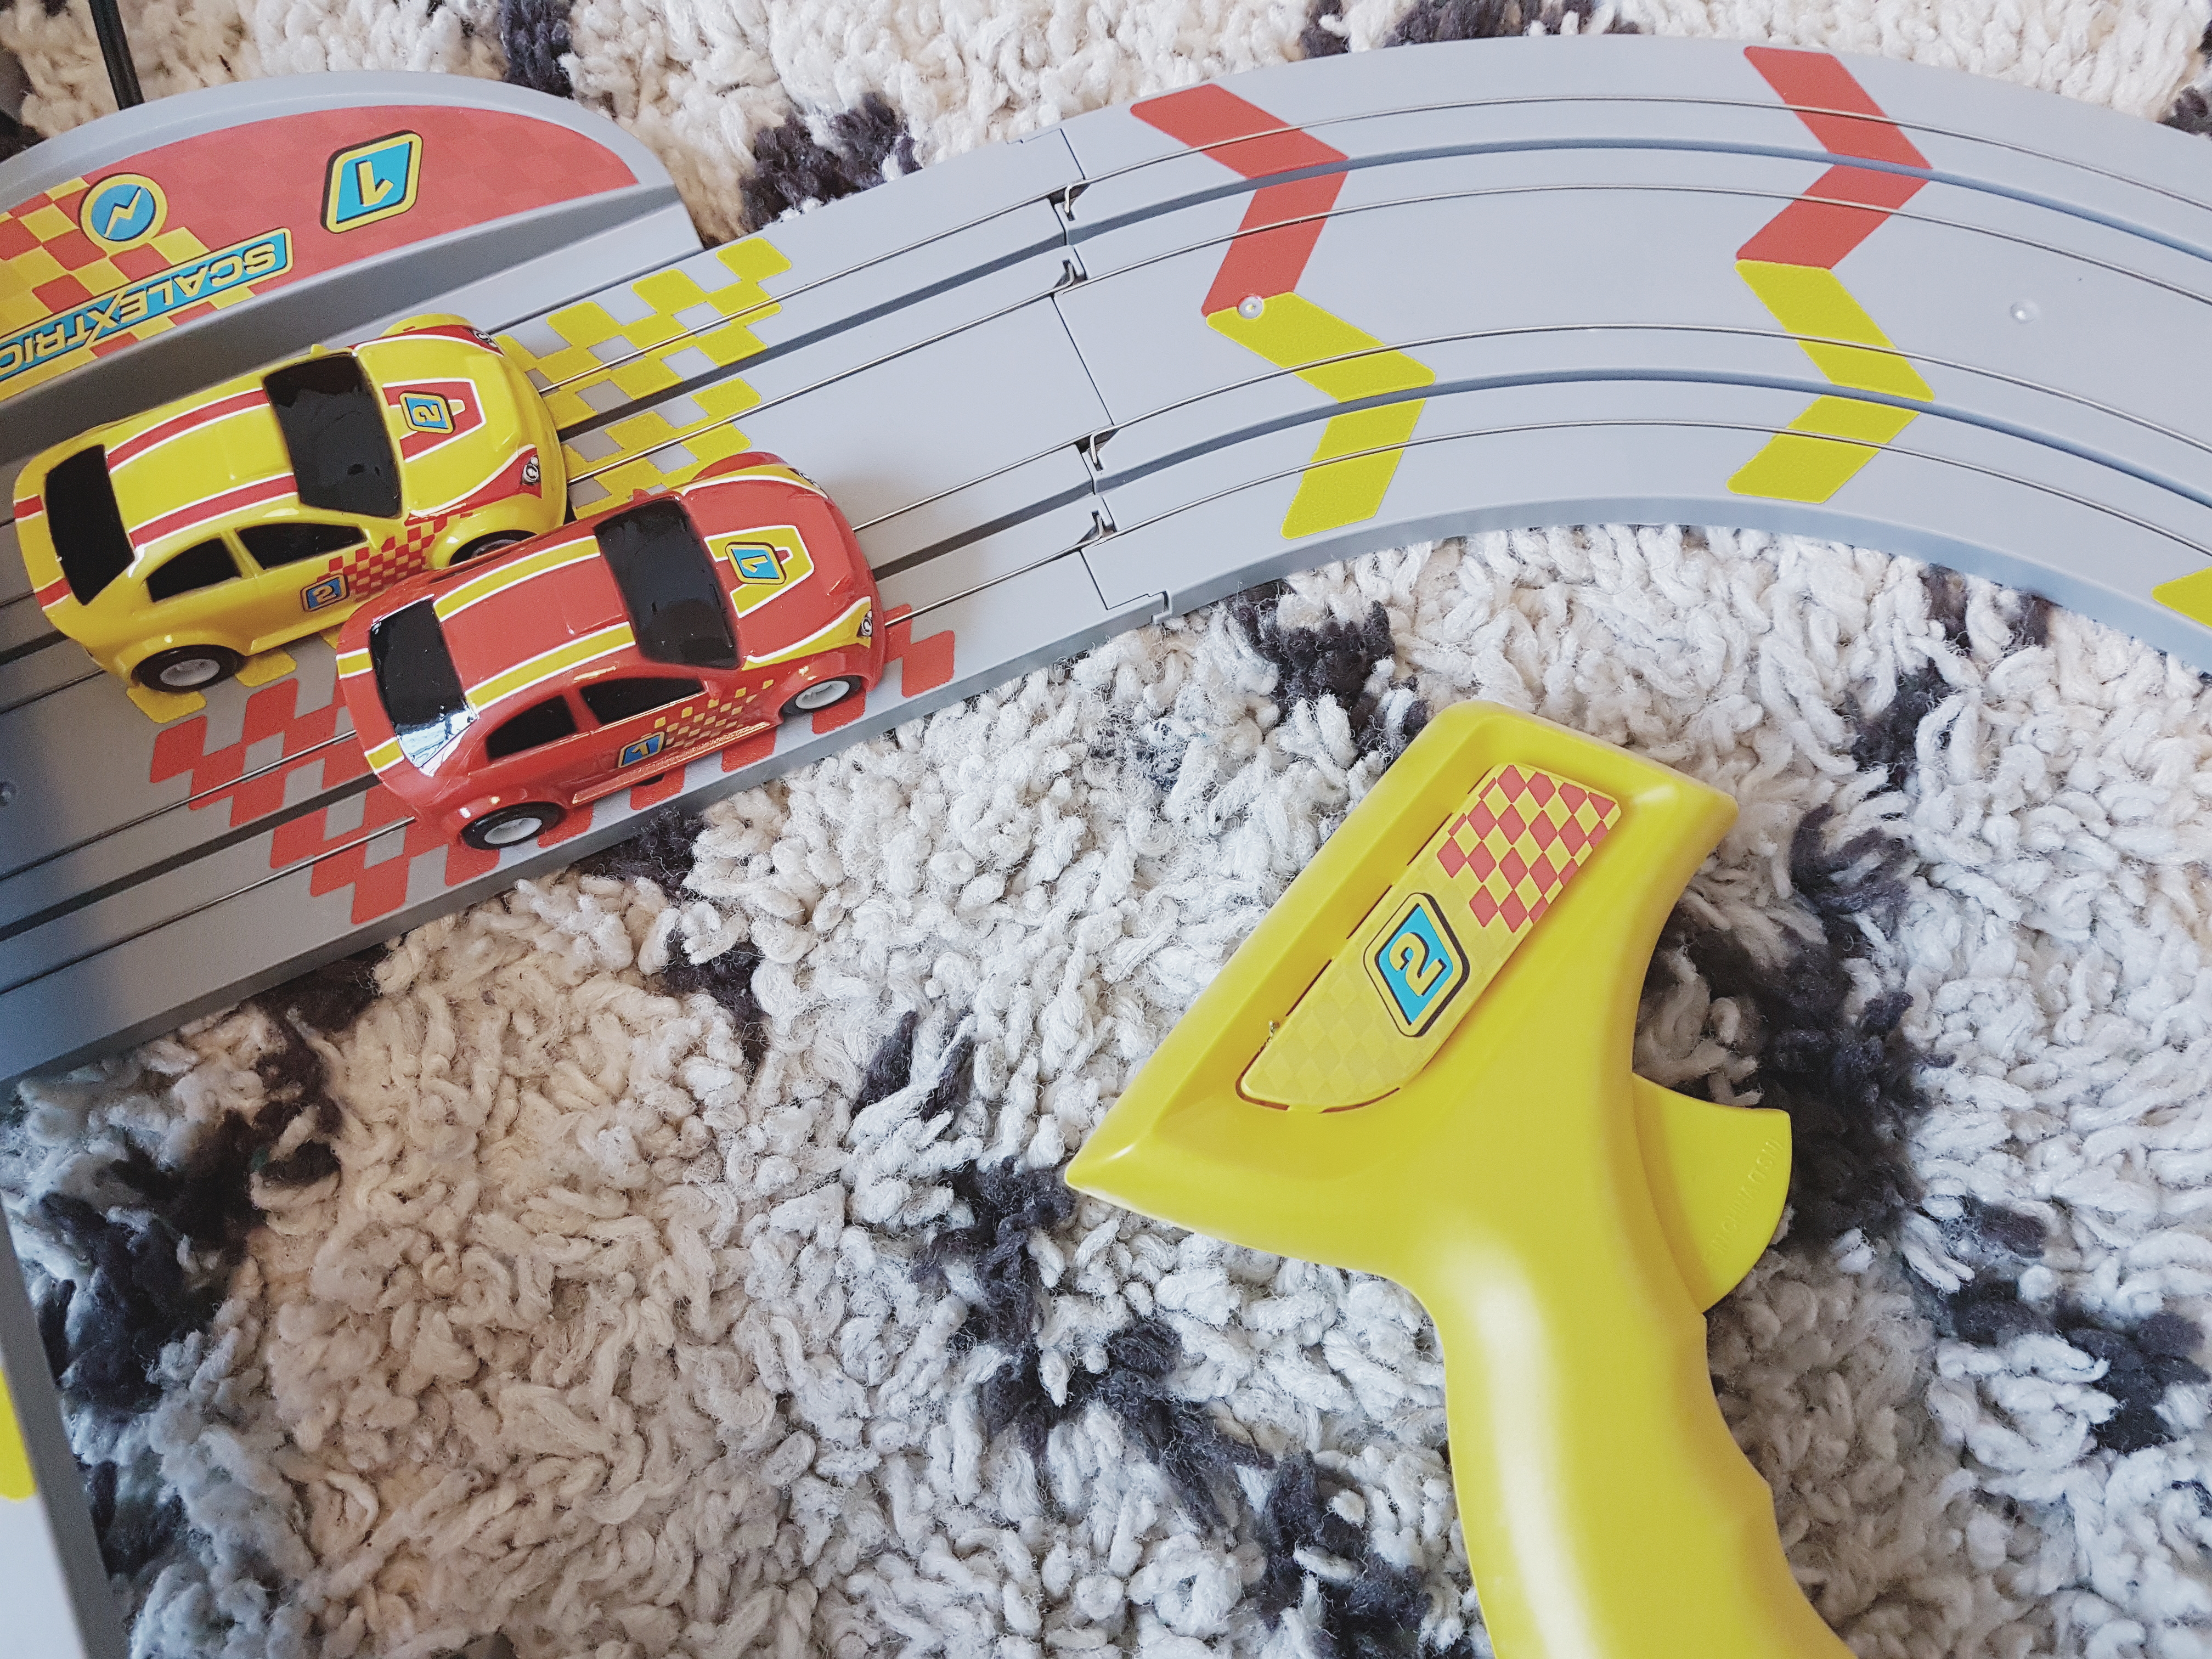 Review| My First Scalextric